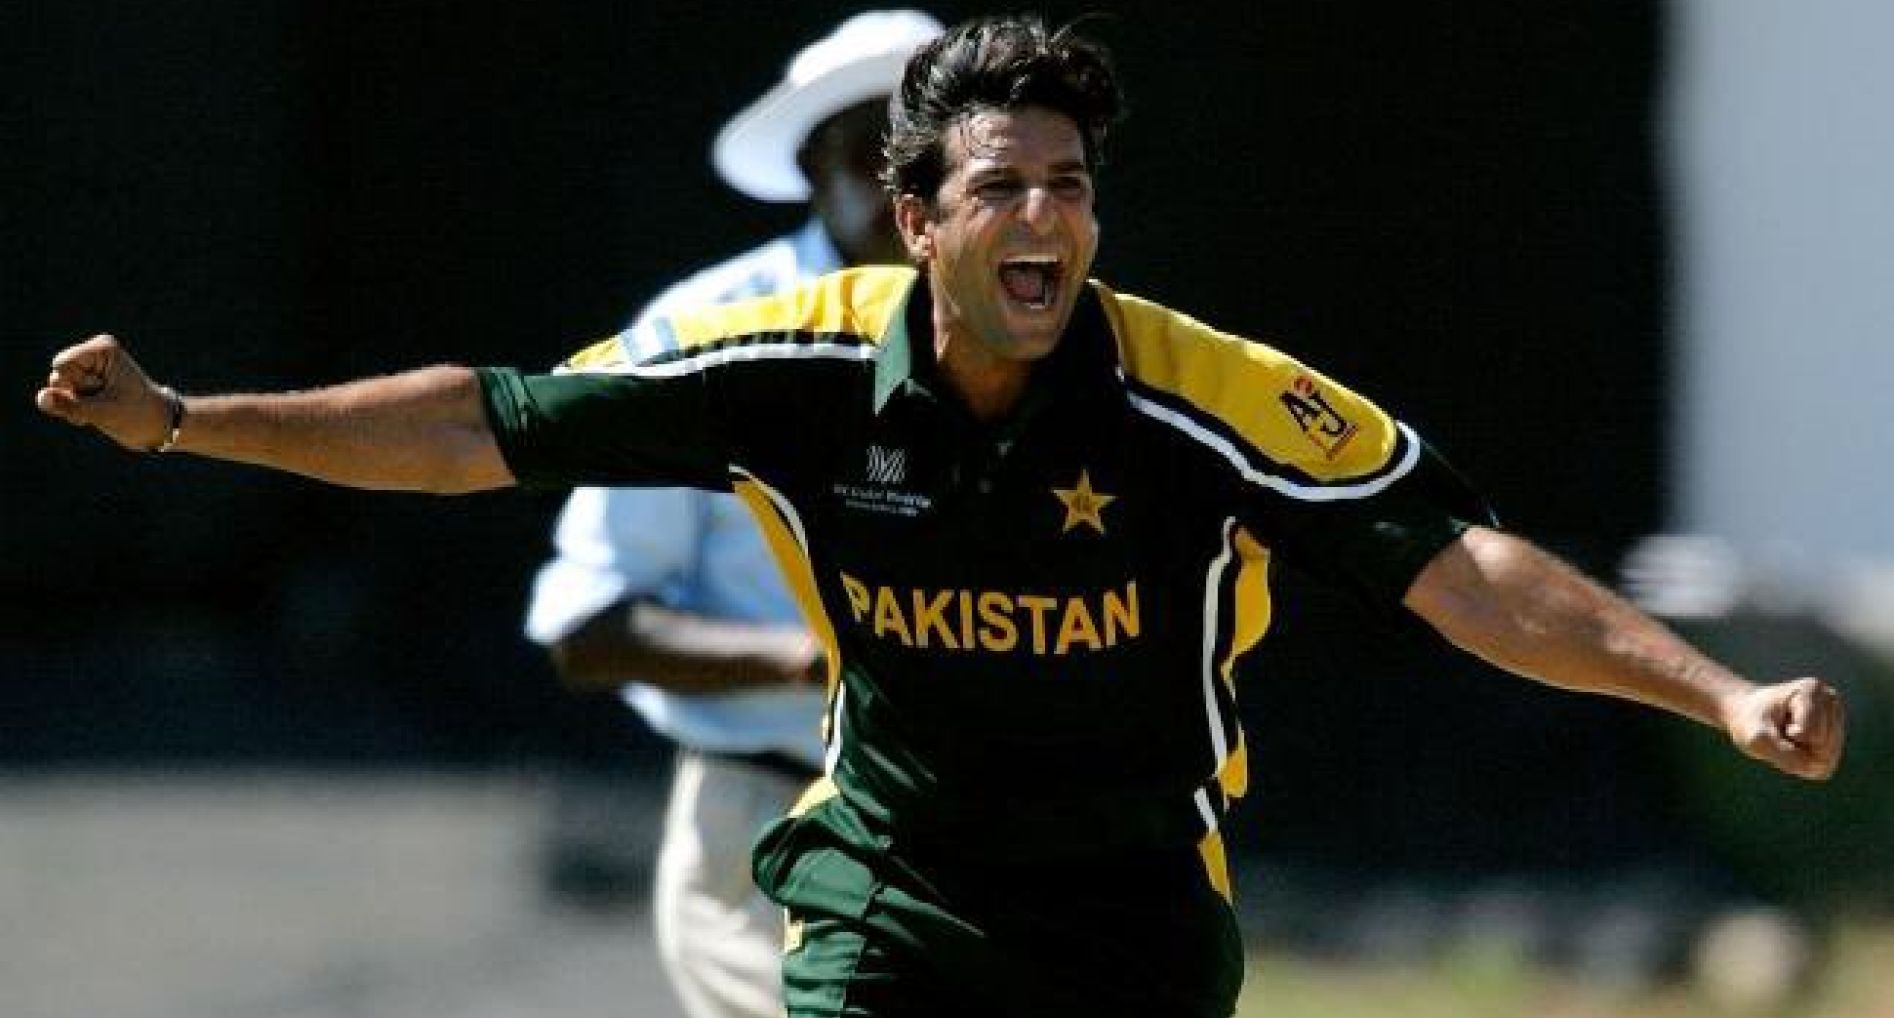 Not a fool, Wasim Akaram couldn’t come to coach Pakistan because of fans’ ruly behaviour